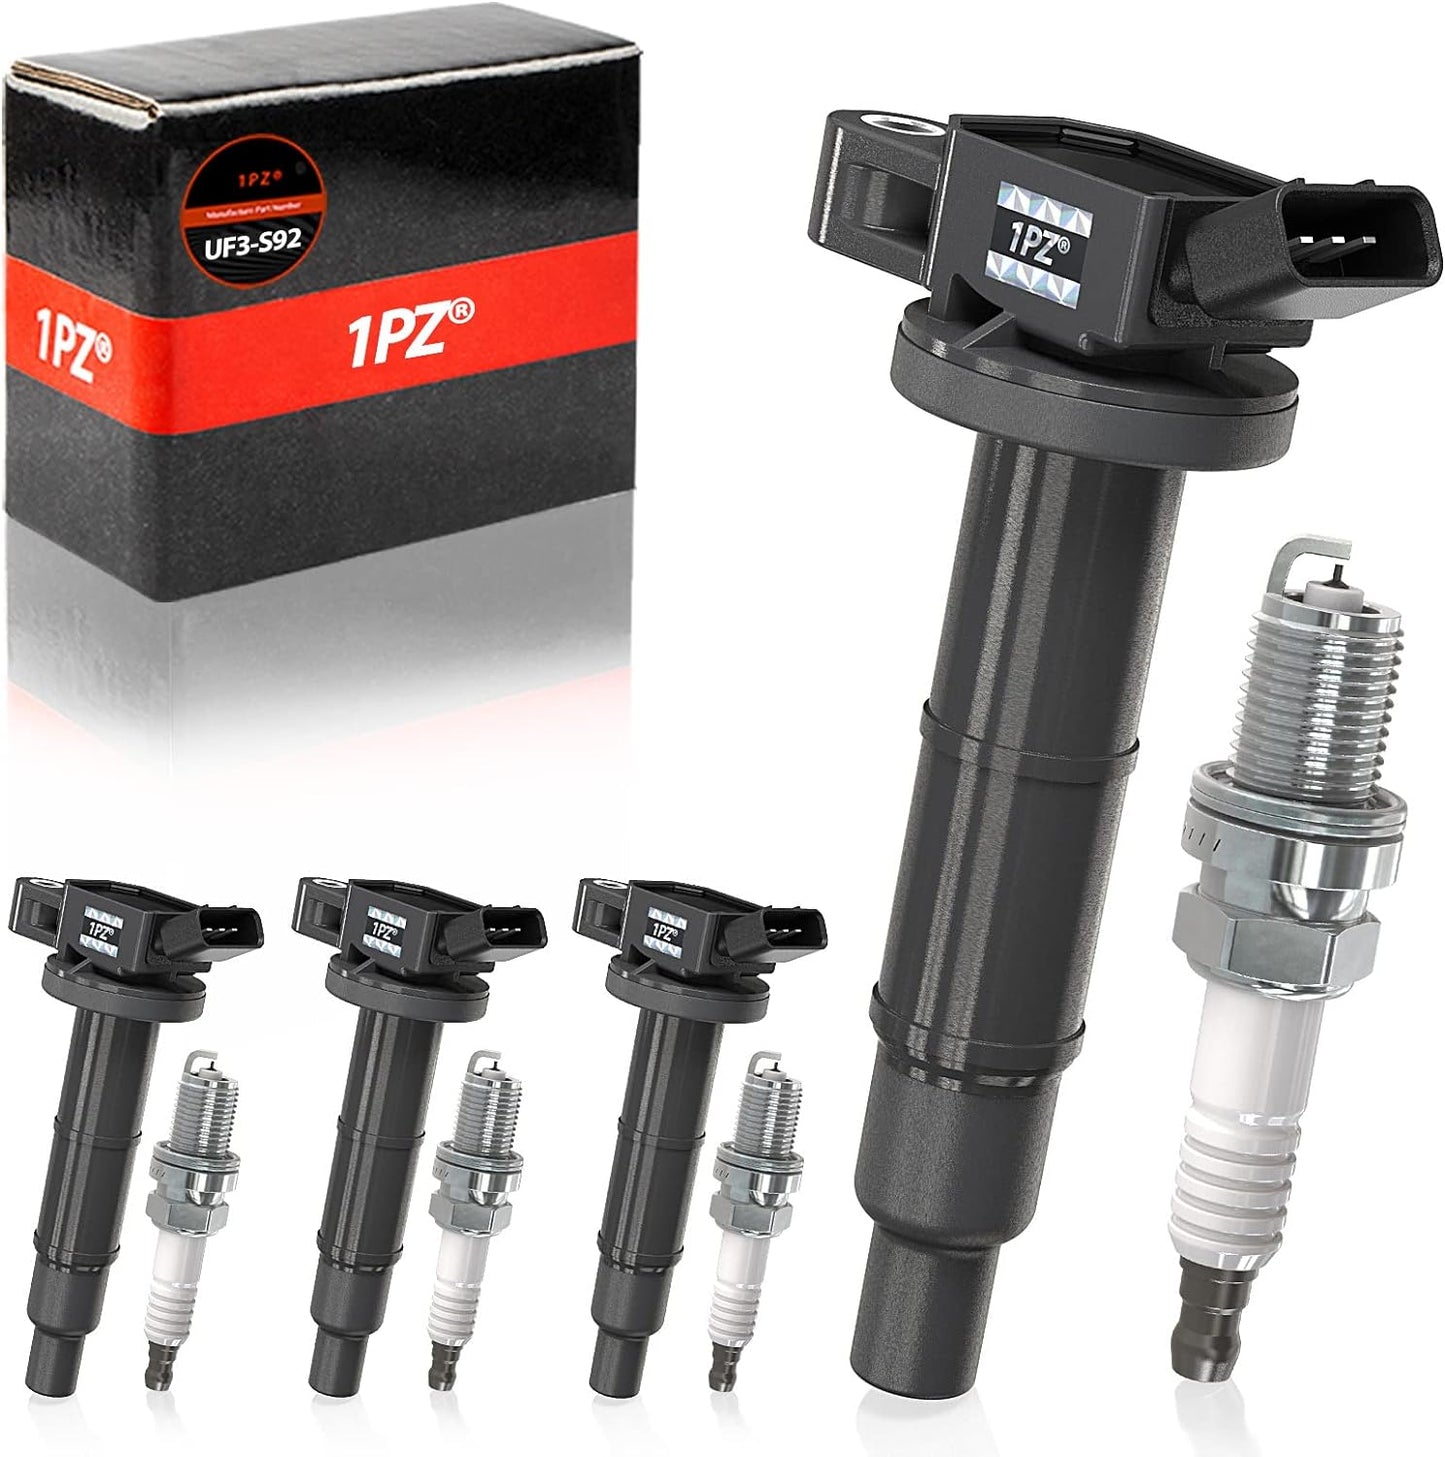 1PZ UF3-S92 Set of 4 Ignition Coil Pack UF333 & Spark Plug 7092 Replacement for Toyota Camry Matrix RAV4 Highlander Solara Vibe TC HS250h 2.4L L4 Compatible with 90919-02244 90080-19023